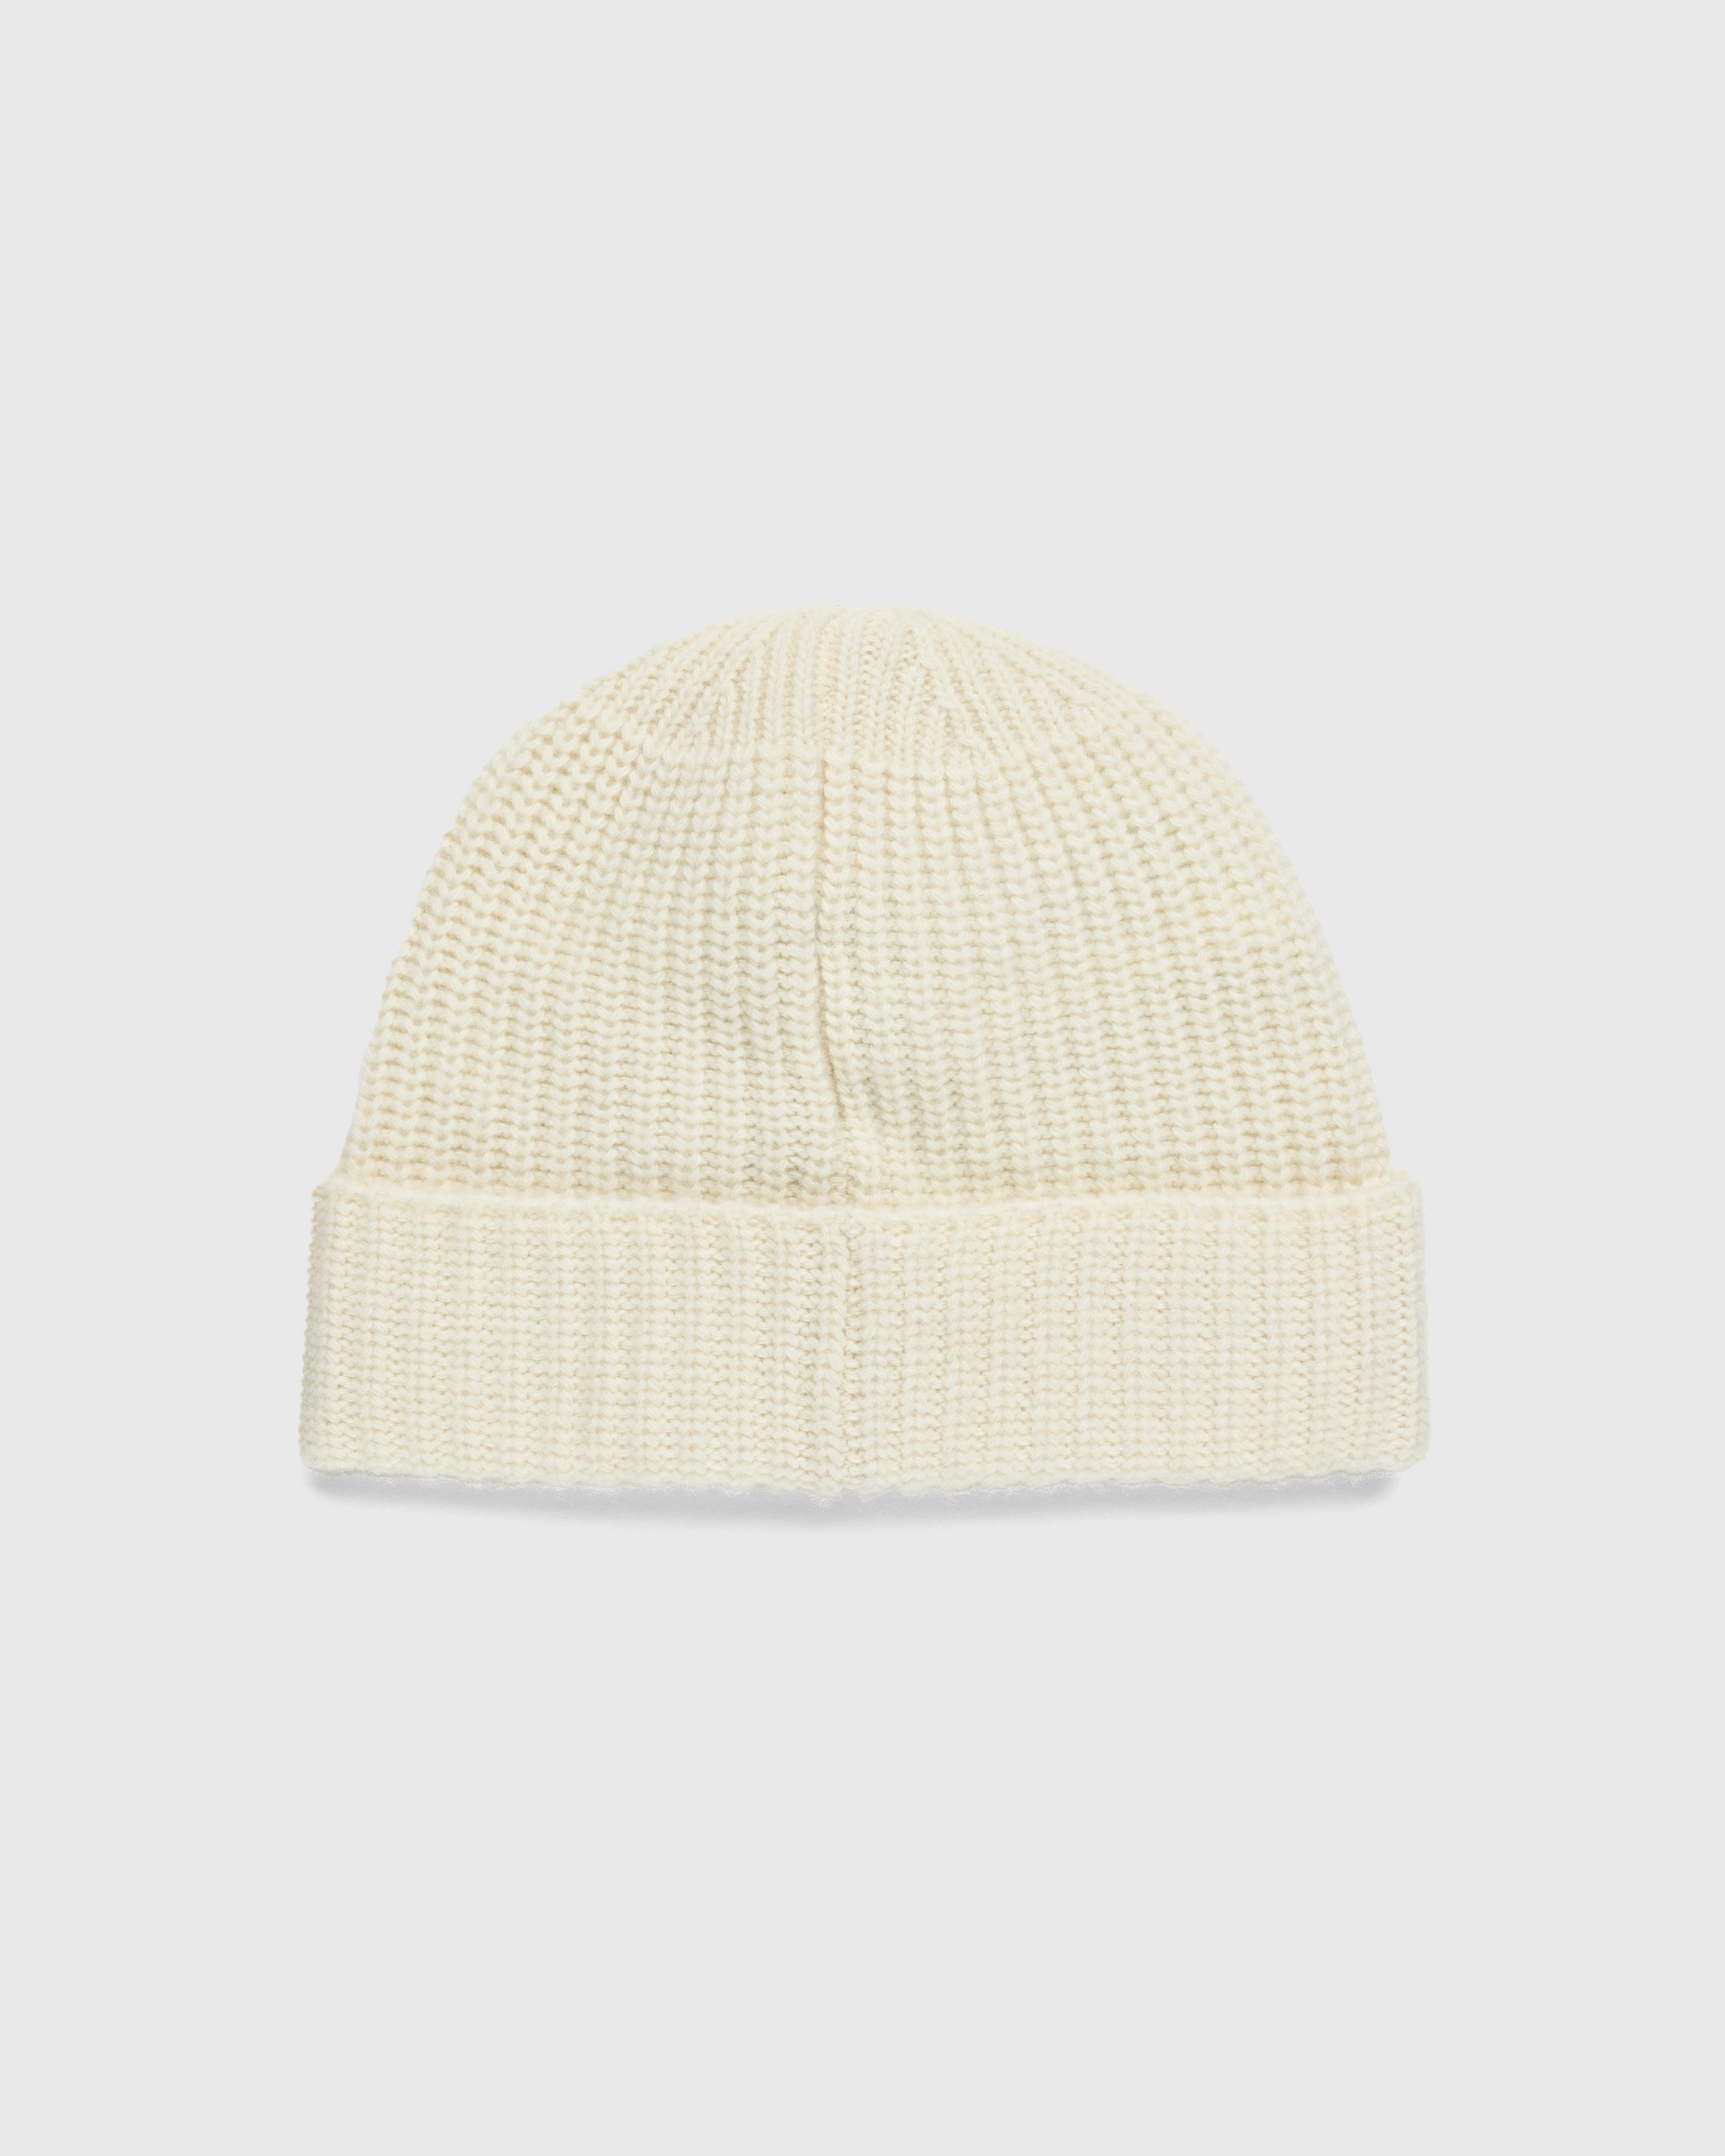 Stone Island - Ribbed Wool Beanie Natural - Accessories - Beige - Image 2